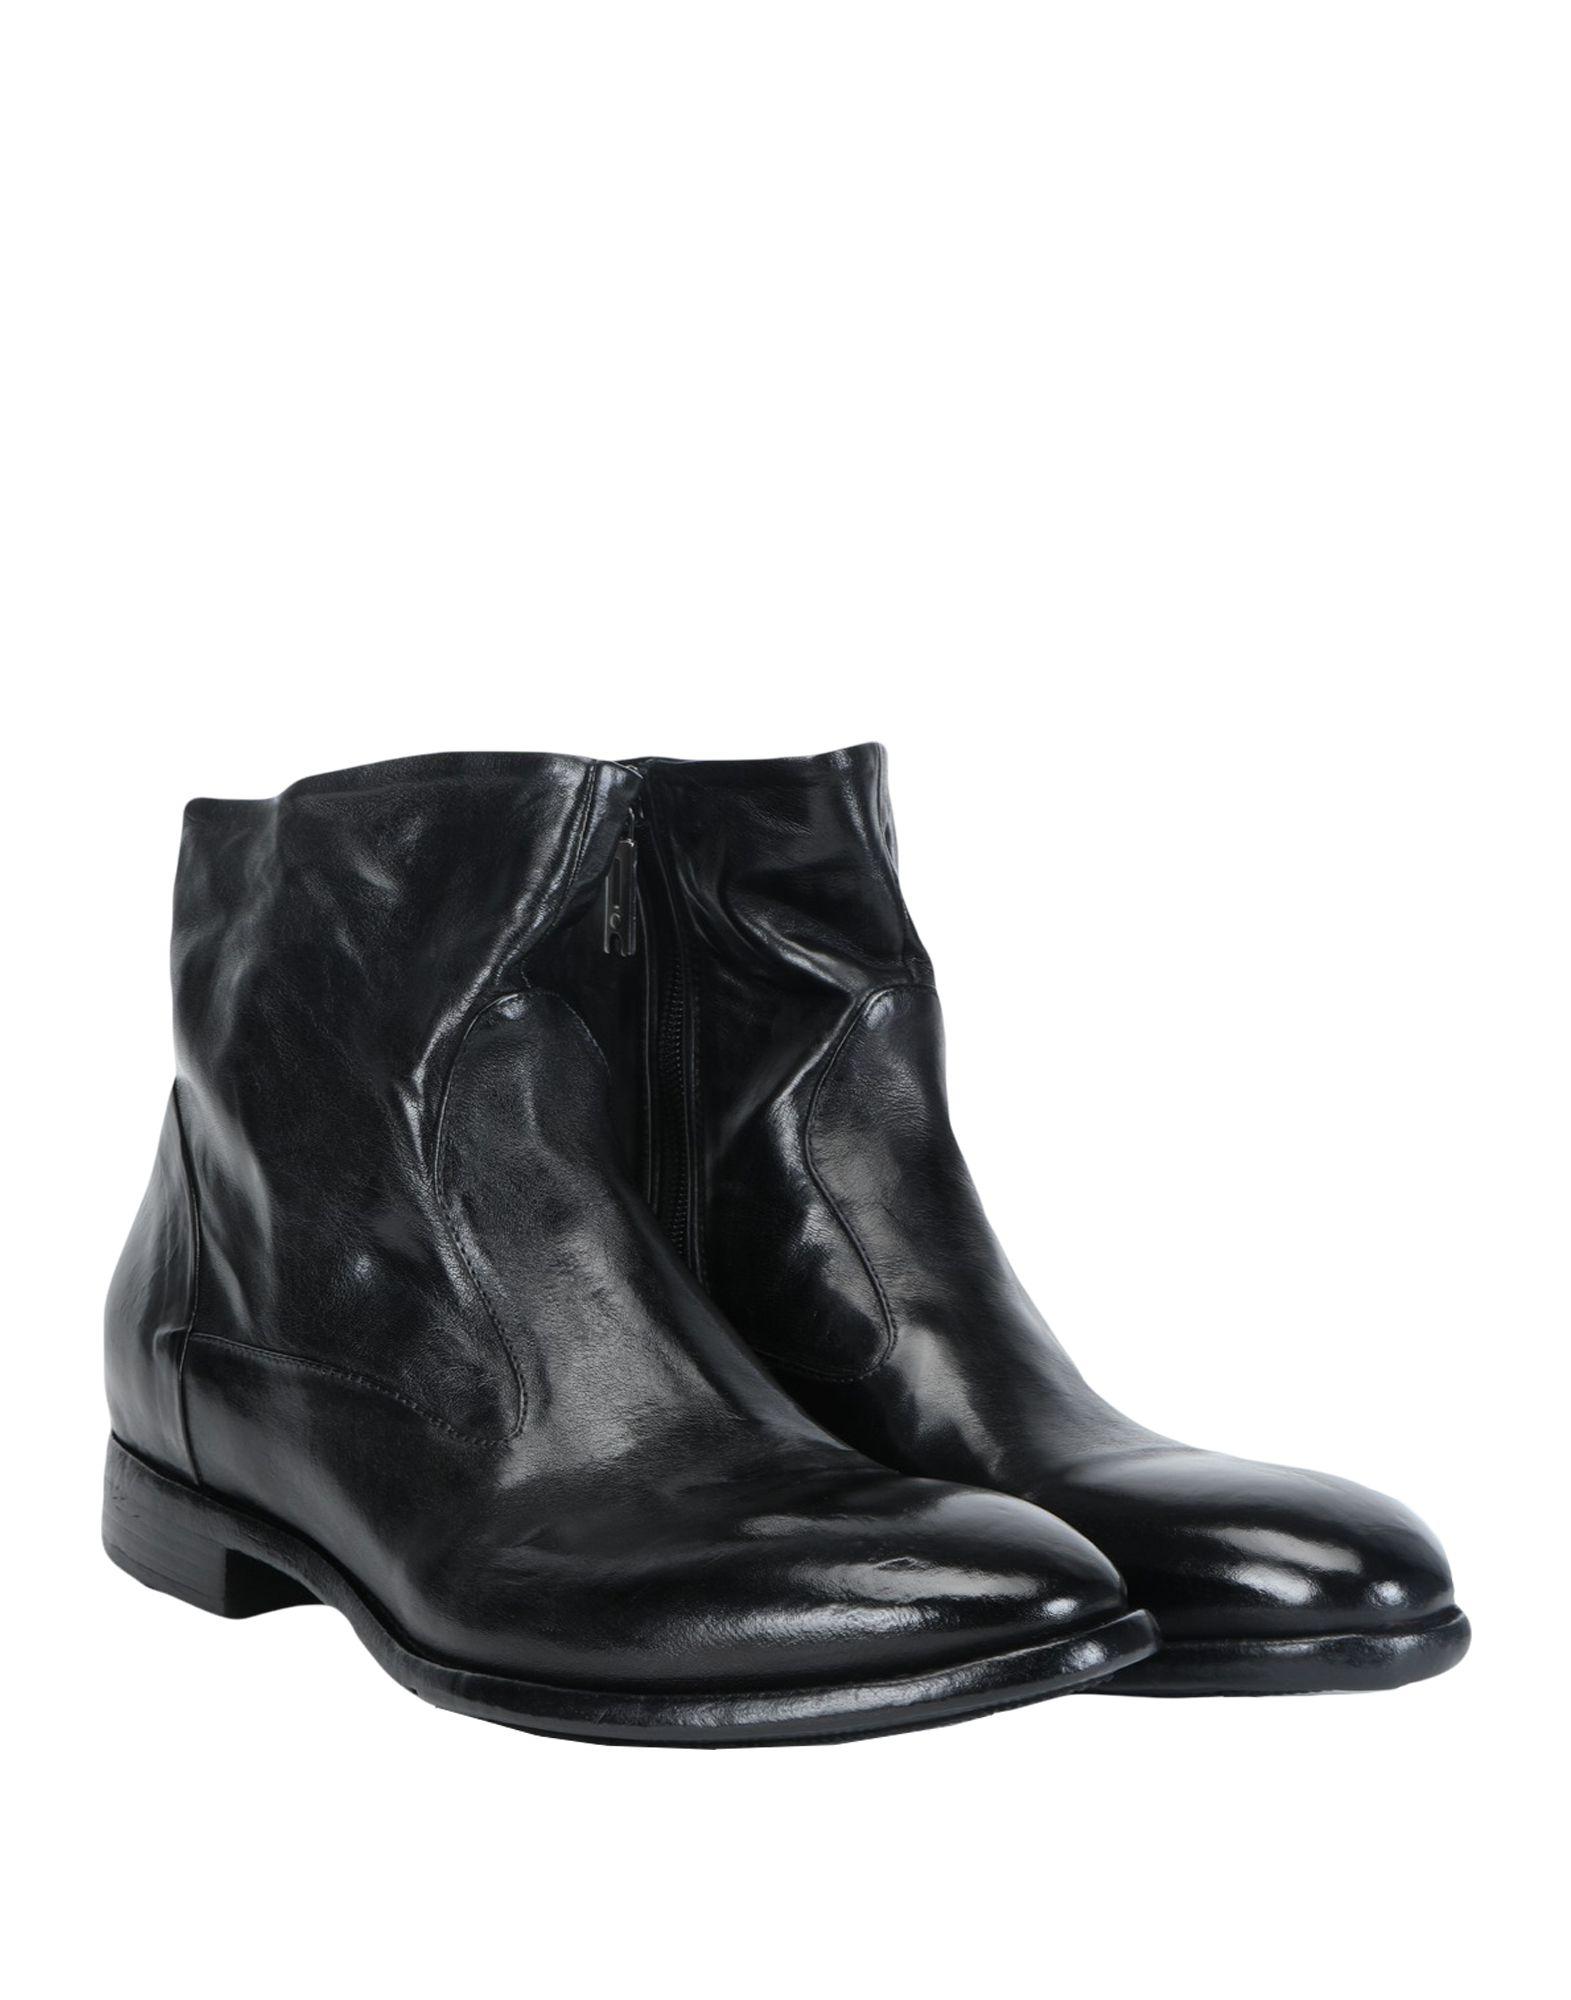 LEMARGO Leather Ankle Boots in Black for Men - Save 28% - Lyst